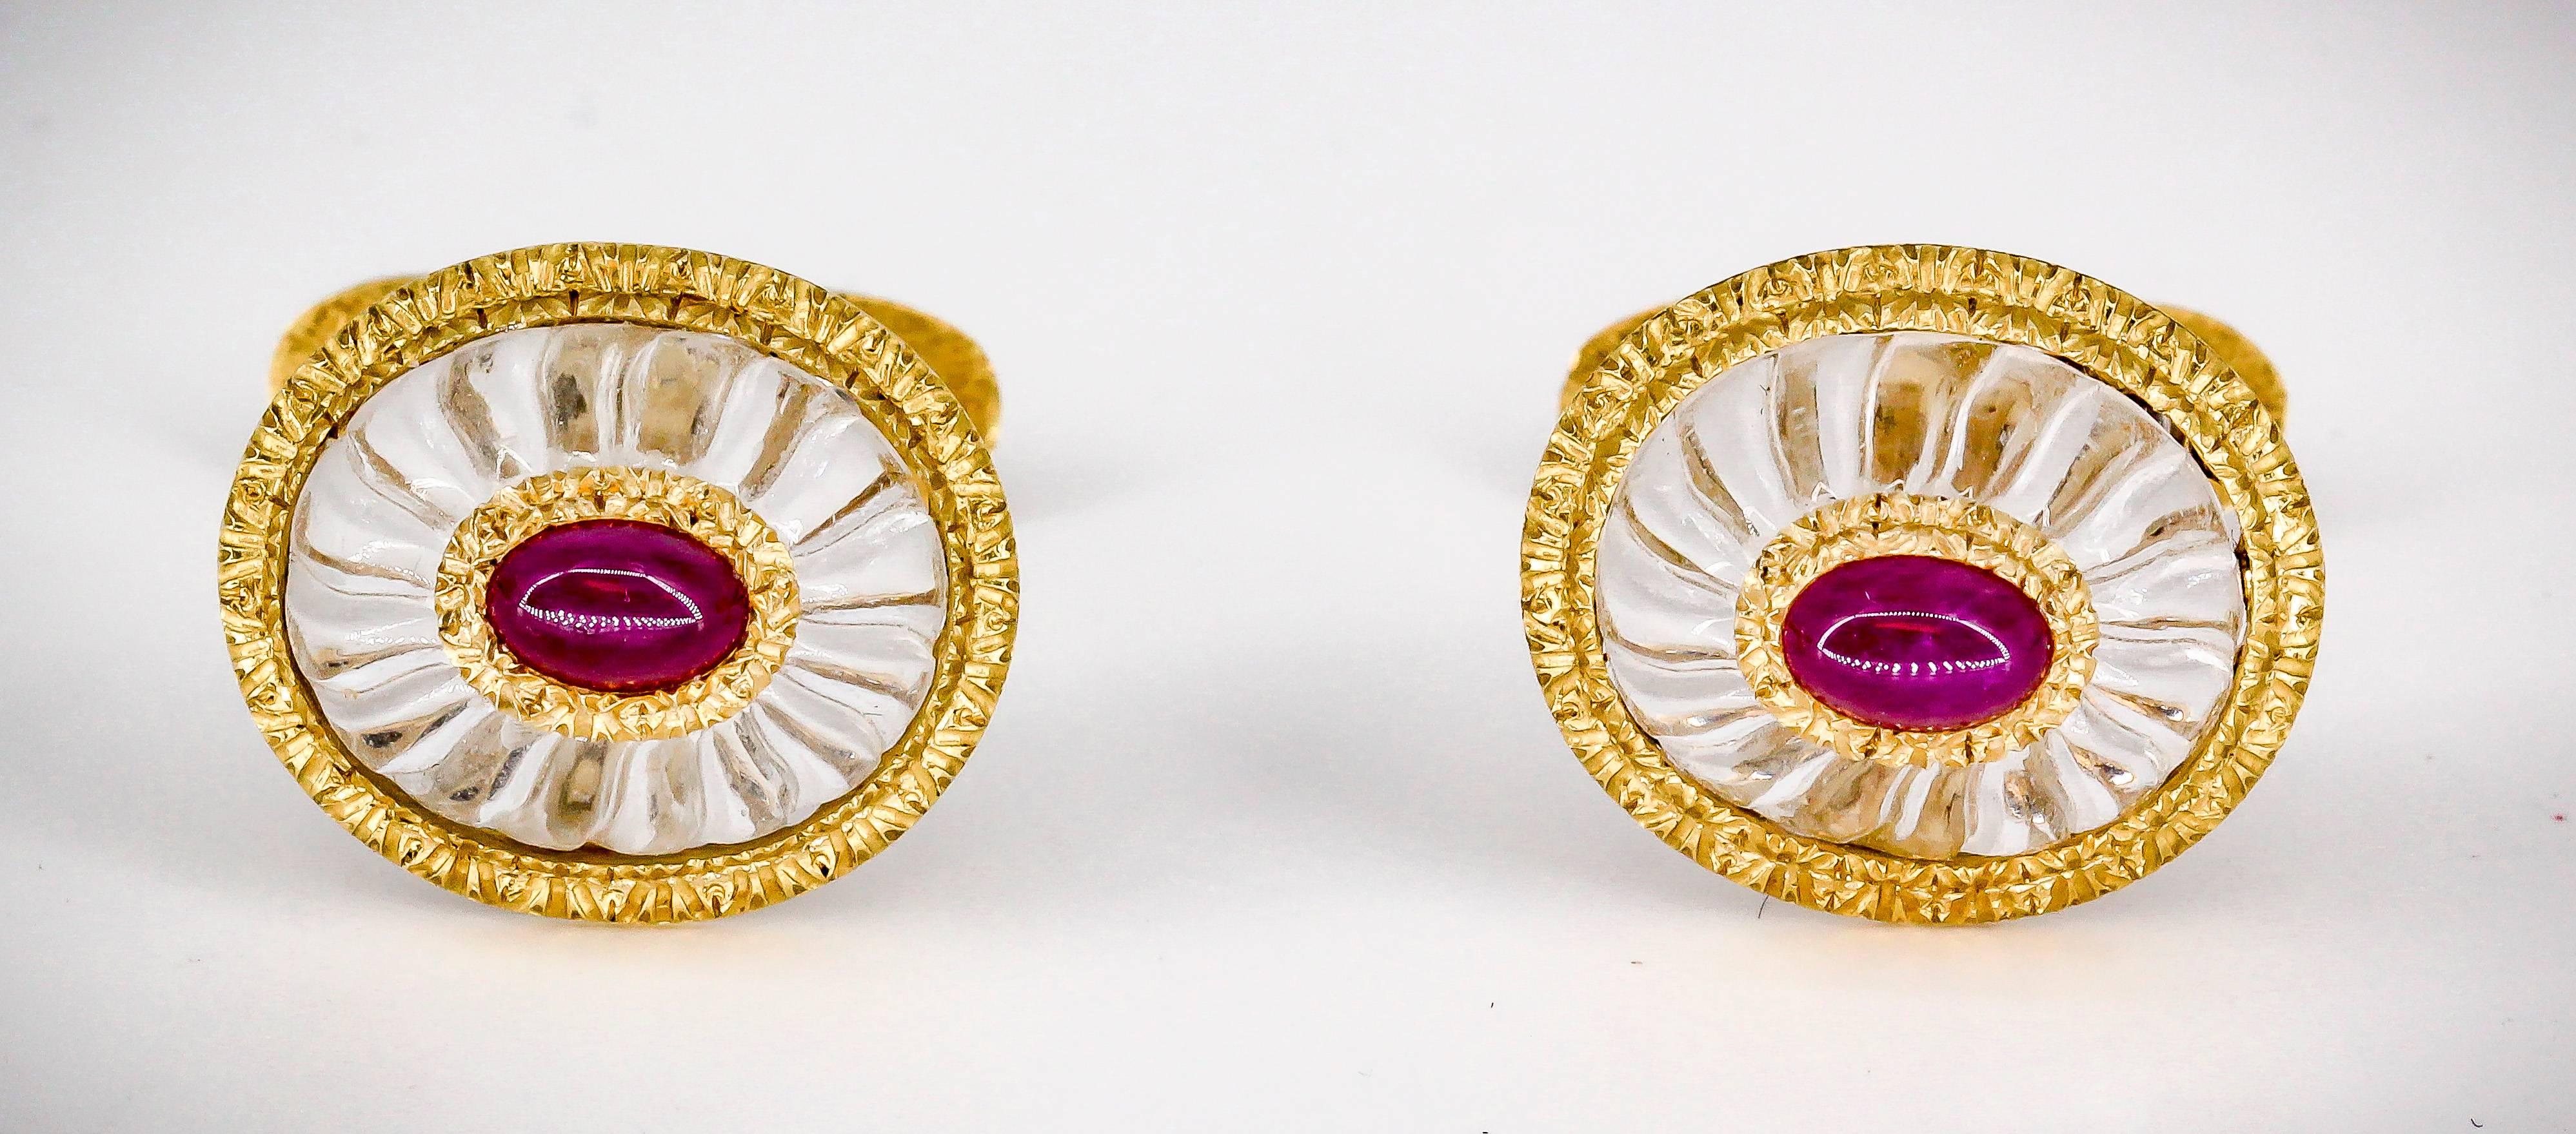 Handsome and refined cabochon ruby, rock crystal and 18K yellow gold cufflinks by Buccellati. They feature a rich red cabochon ruby in the middle, surrounded by a gold ring and rock crystal below it. The gold is detailed in the trademark Buccellati